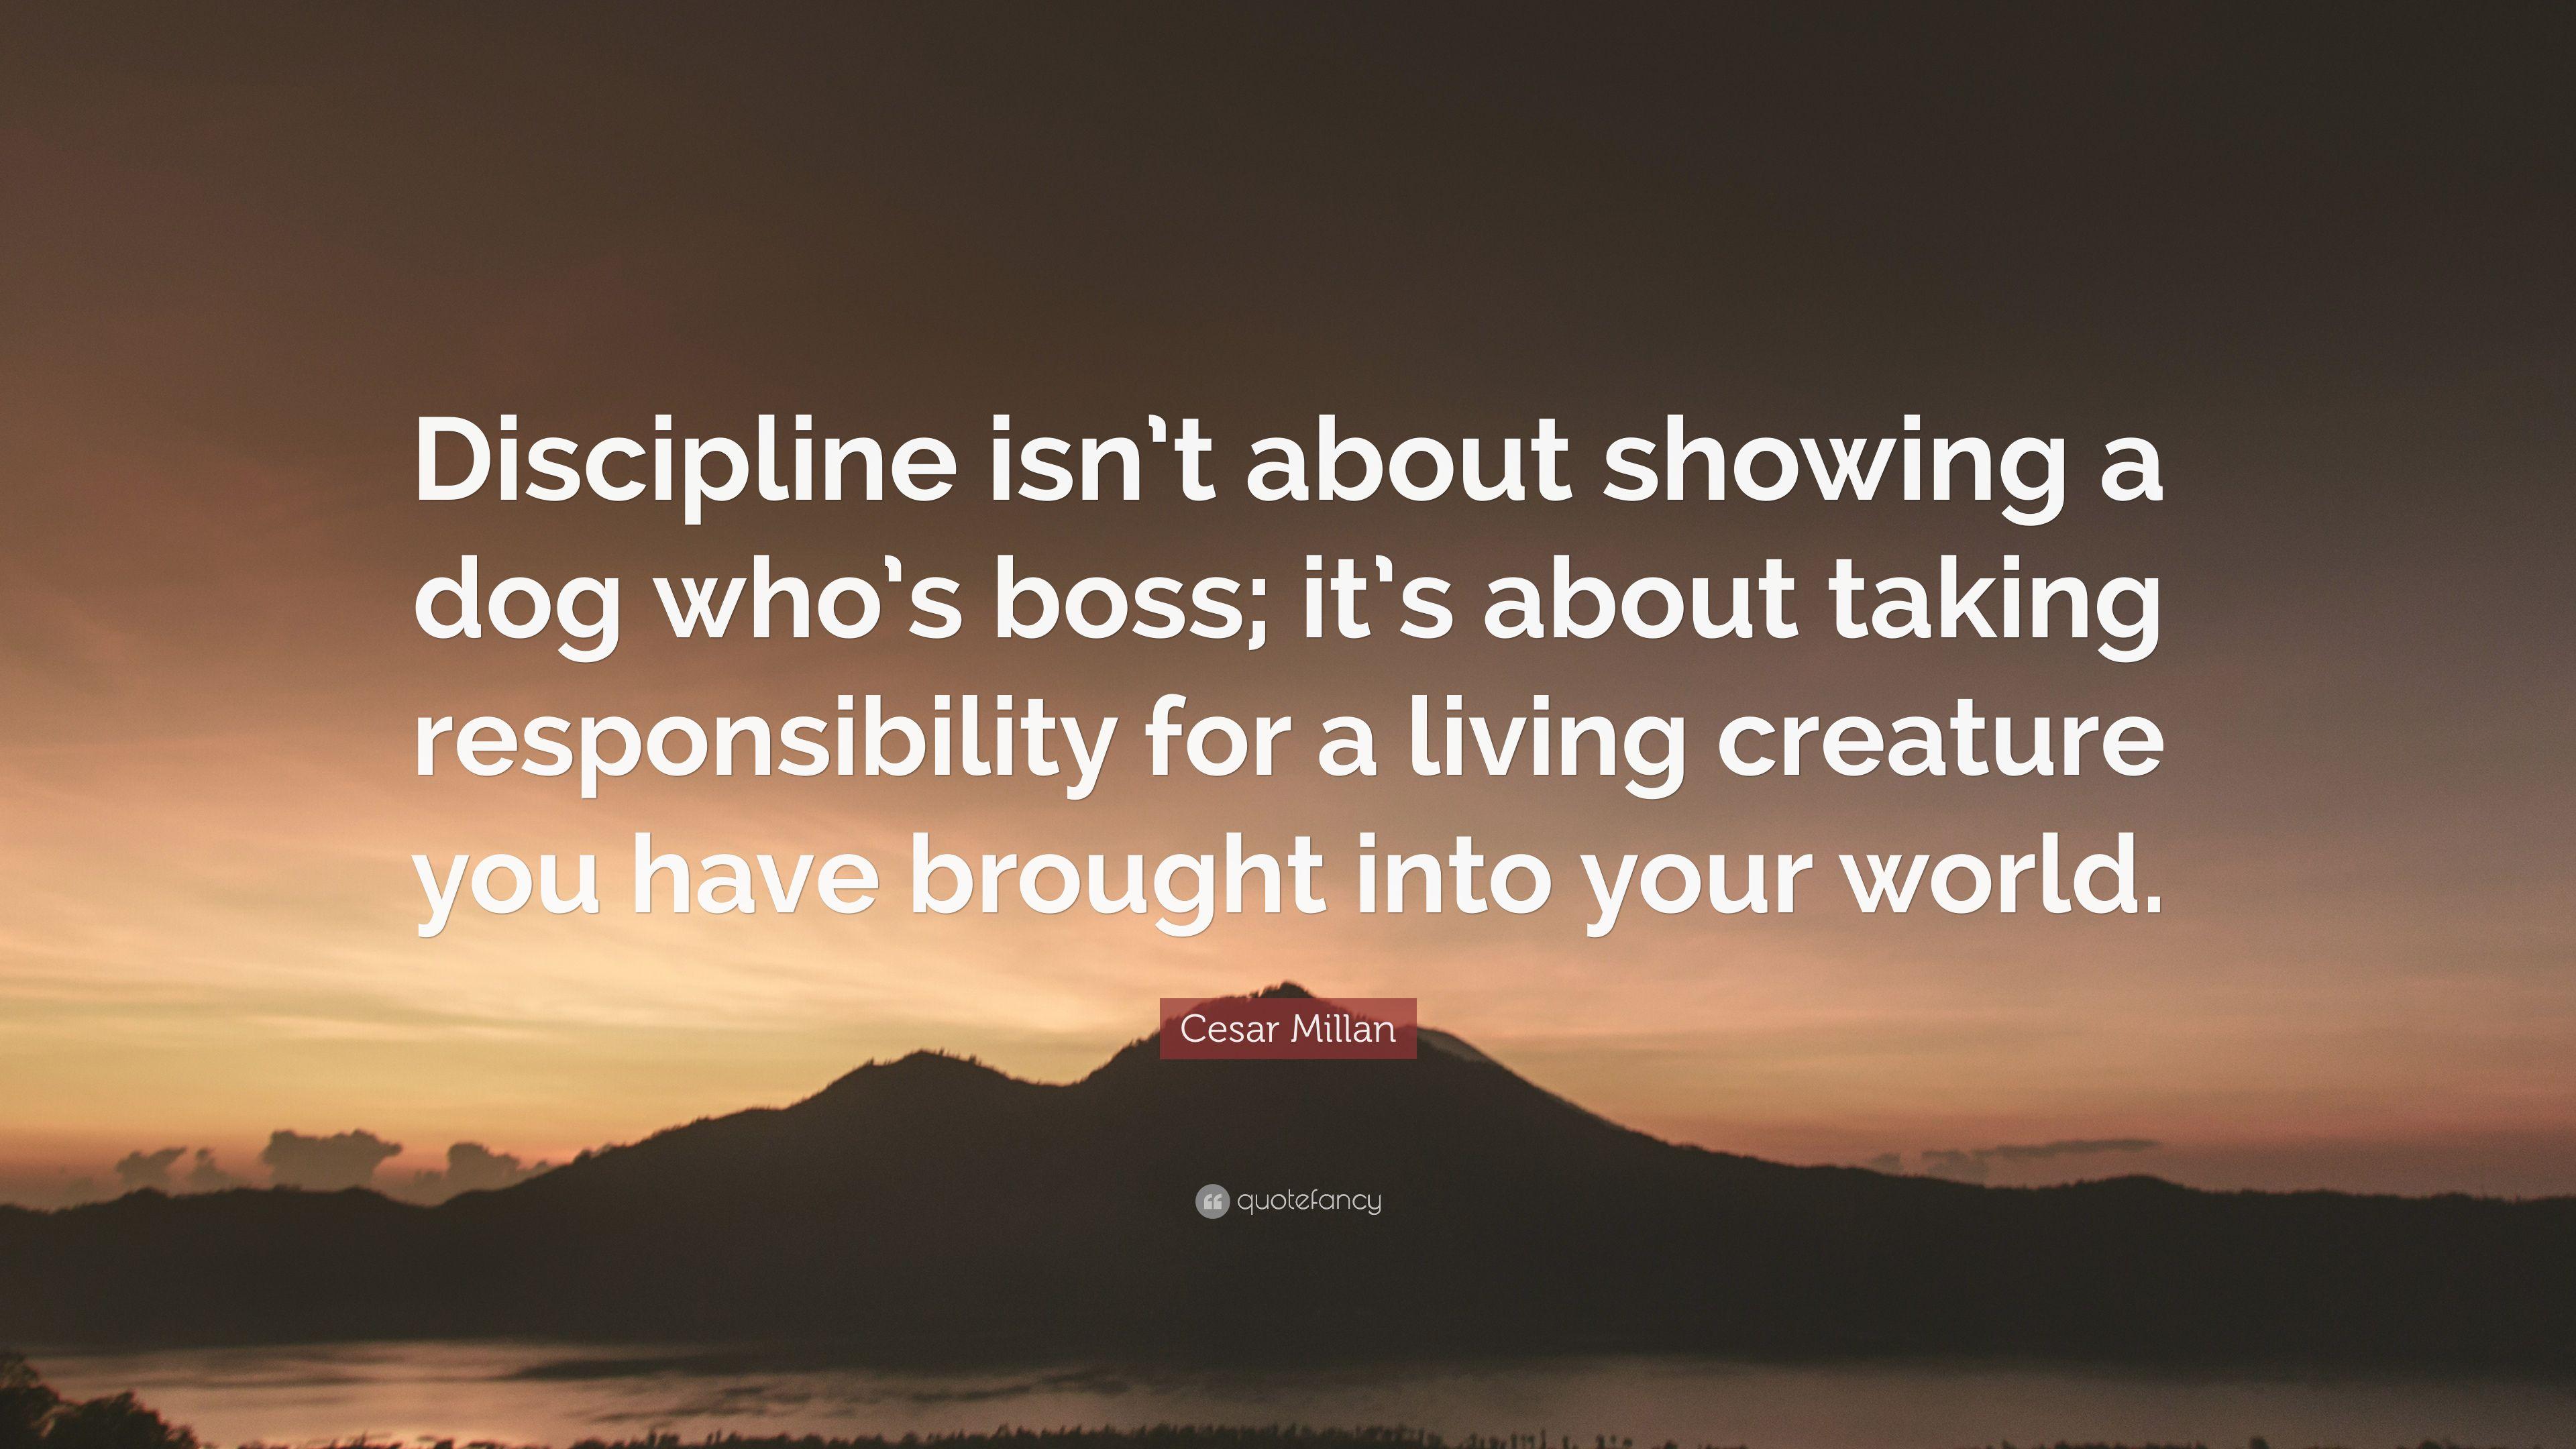 Cesar Millan Quote: “Discipline isn't about showing a dog who's boss